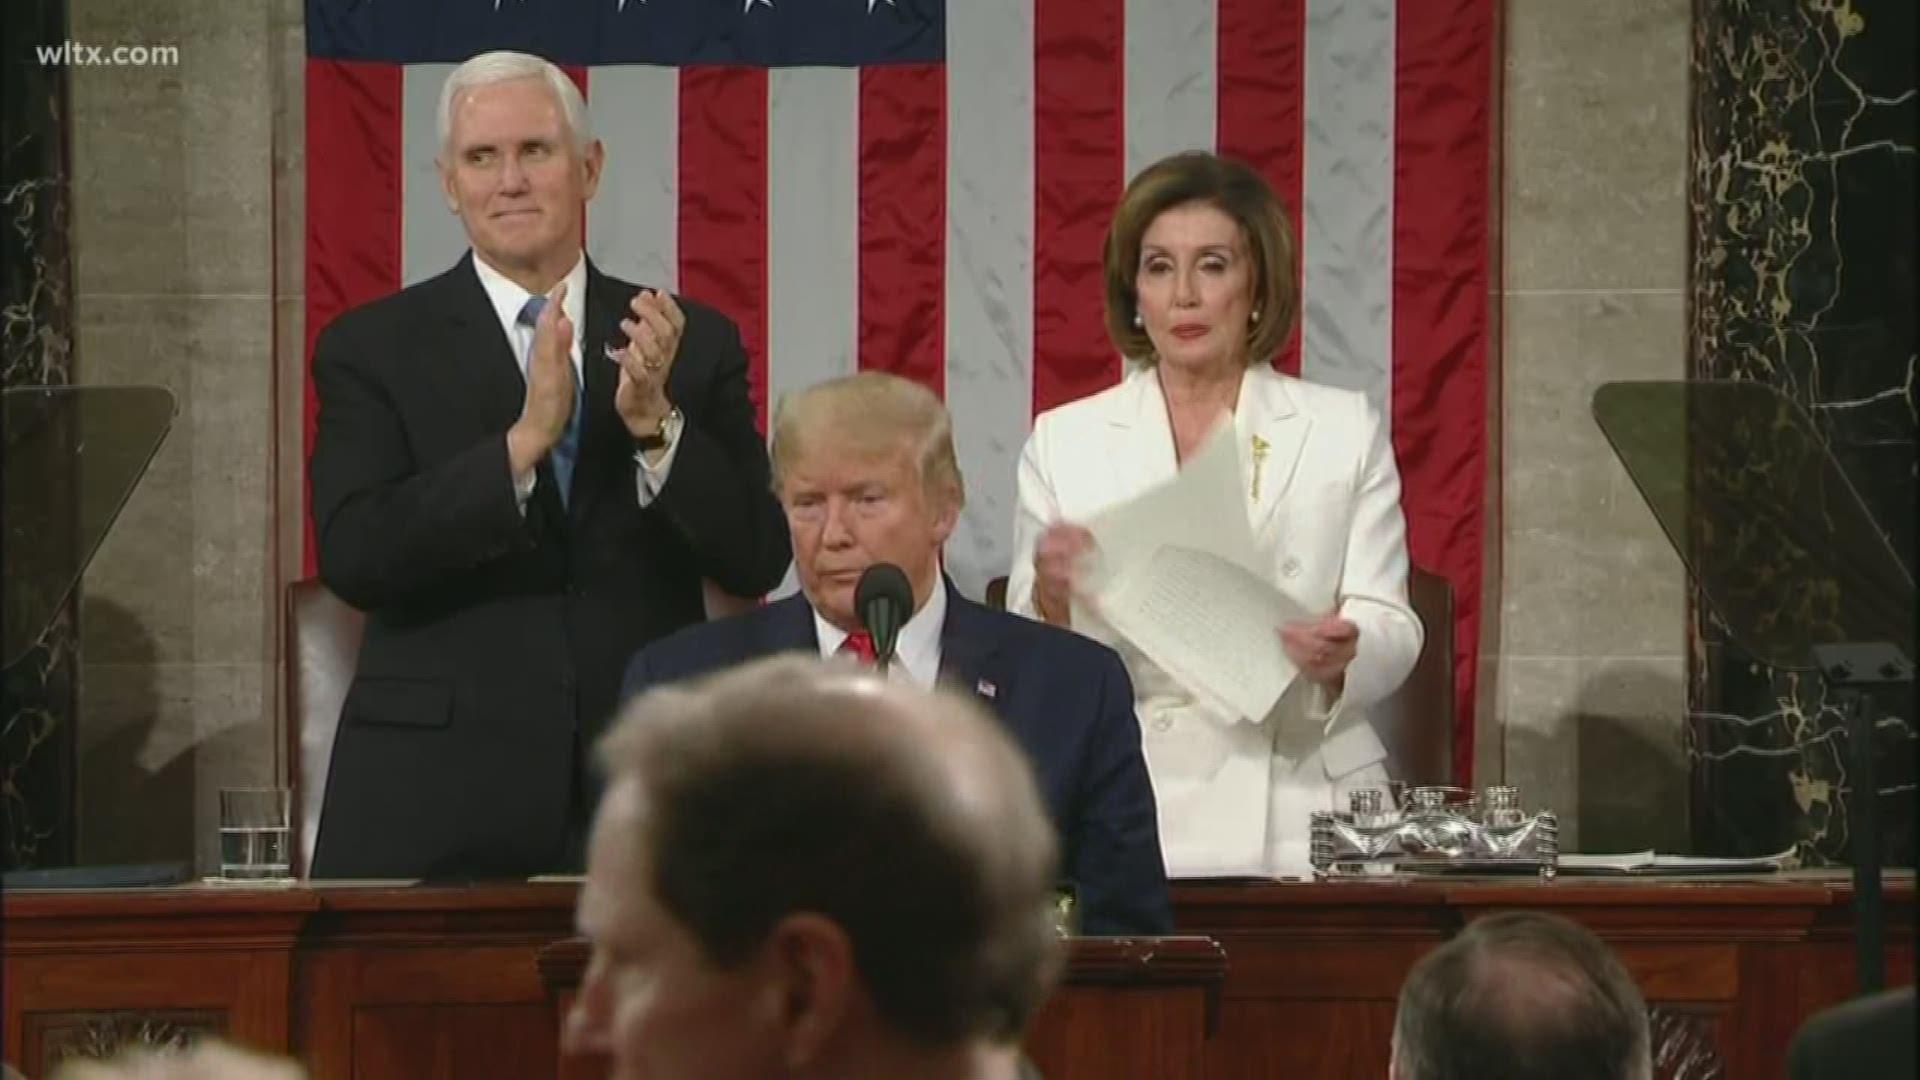 House Speaker Nancy Pelosi started ripping up her copy of President Donald Trump's speech right as the president finished speaking.